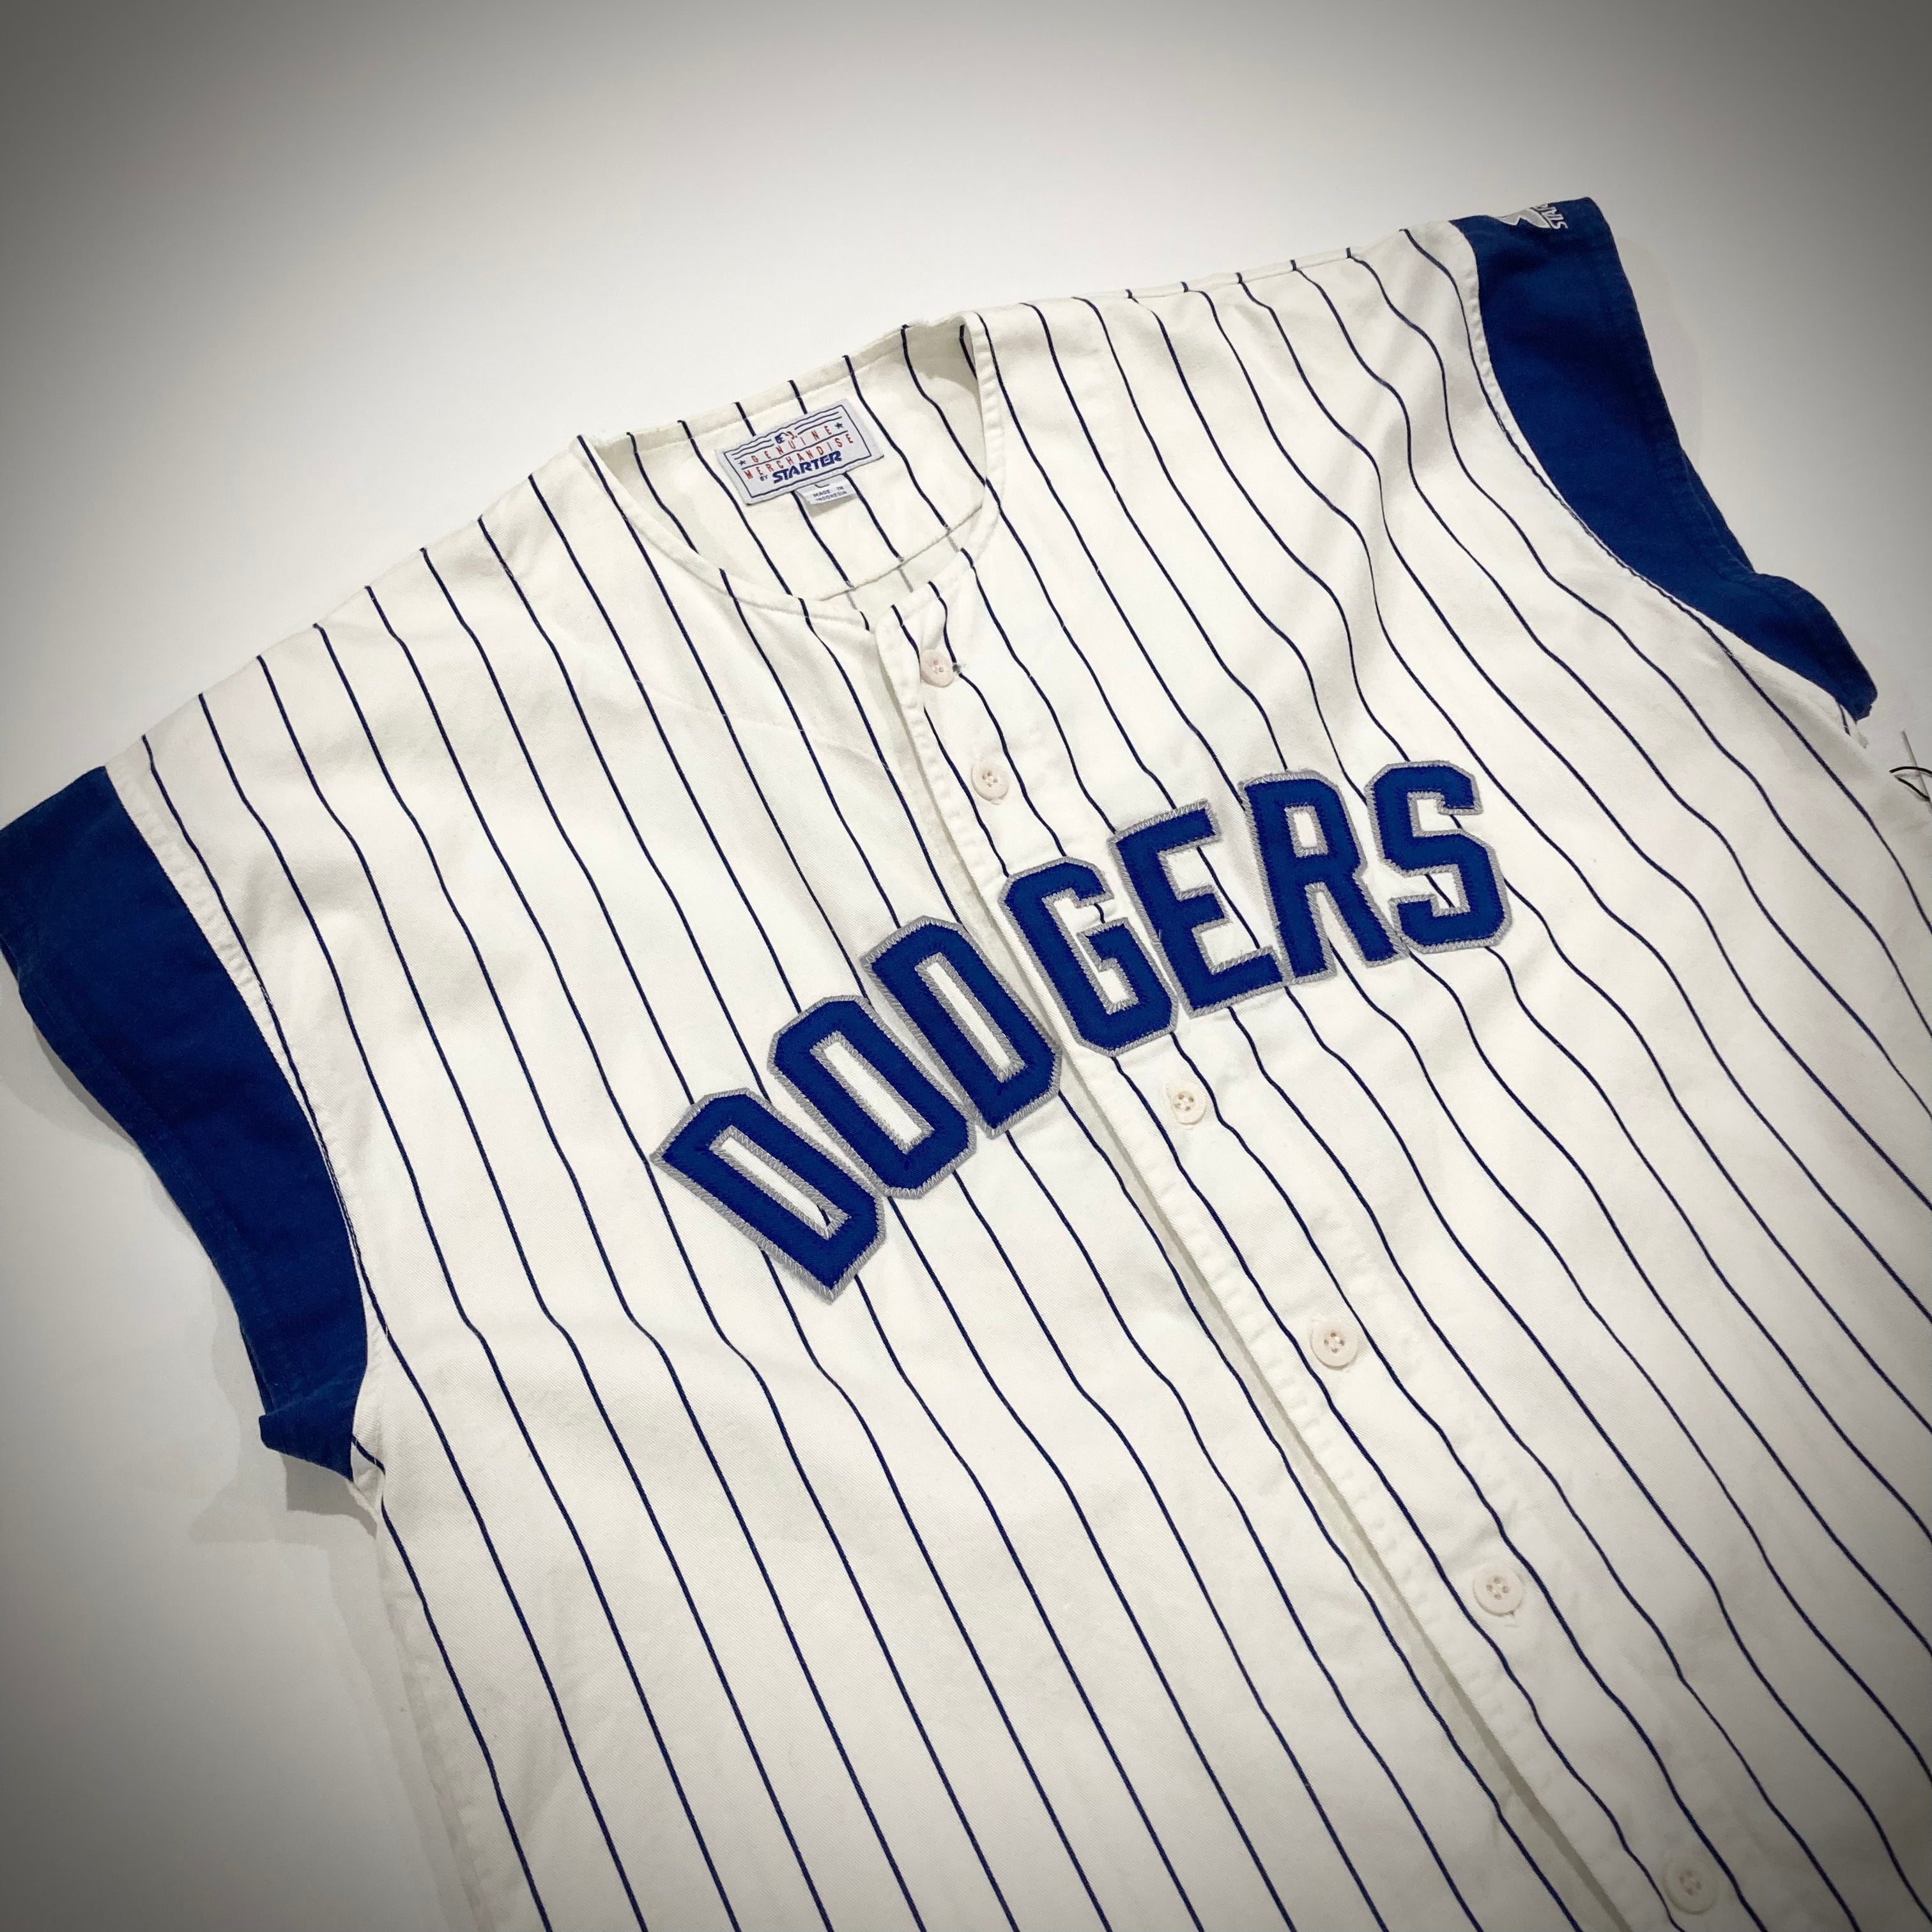 classic dodgers jersey